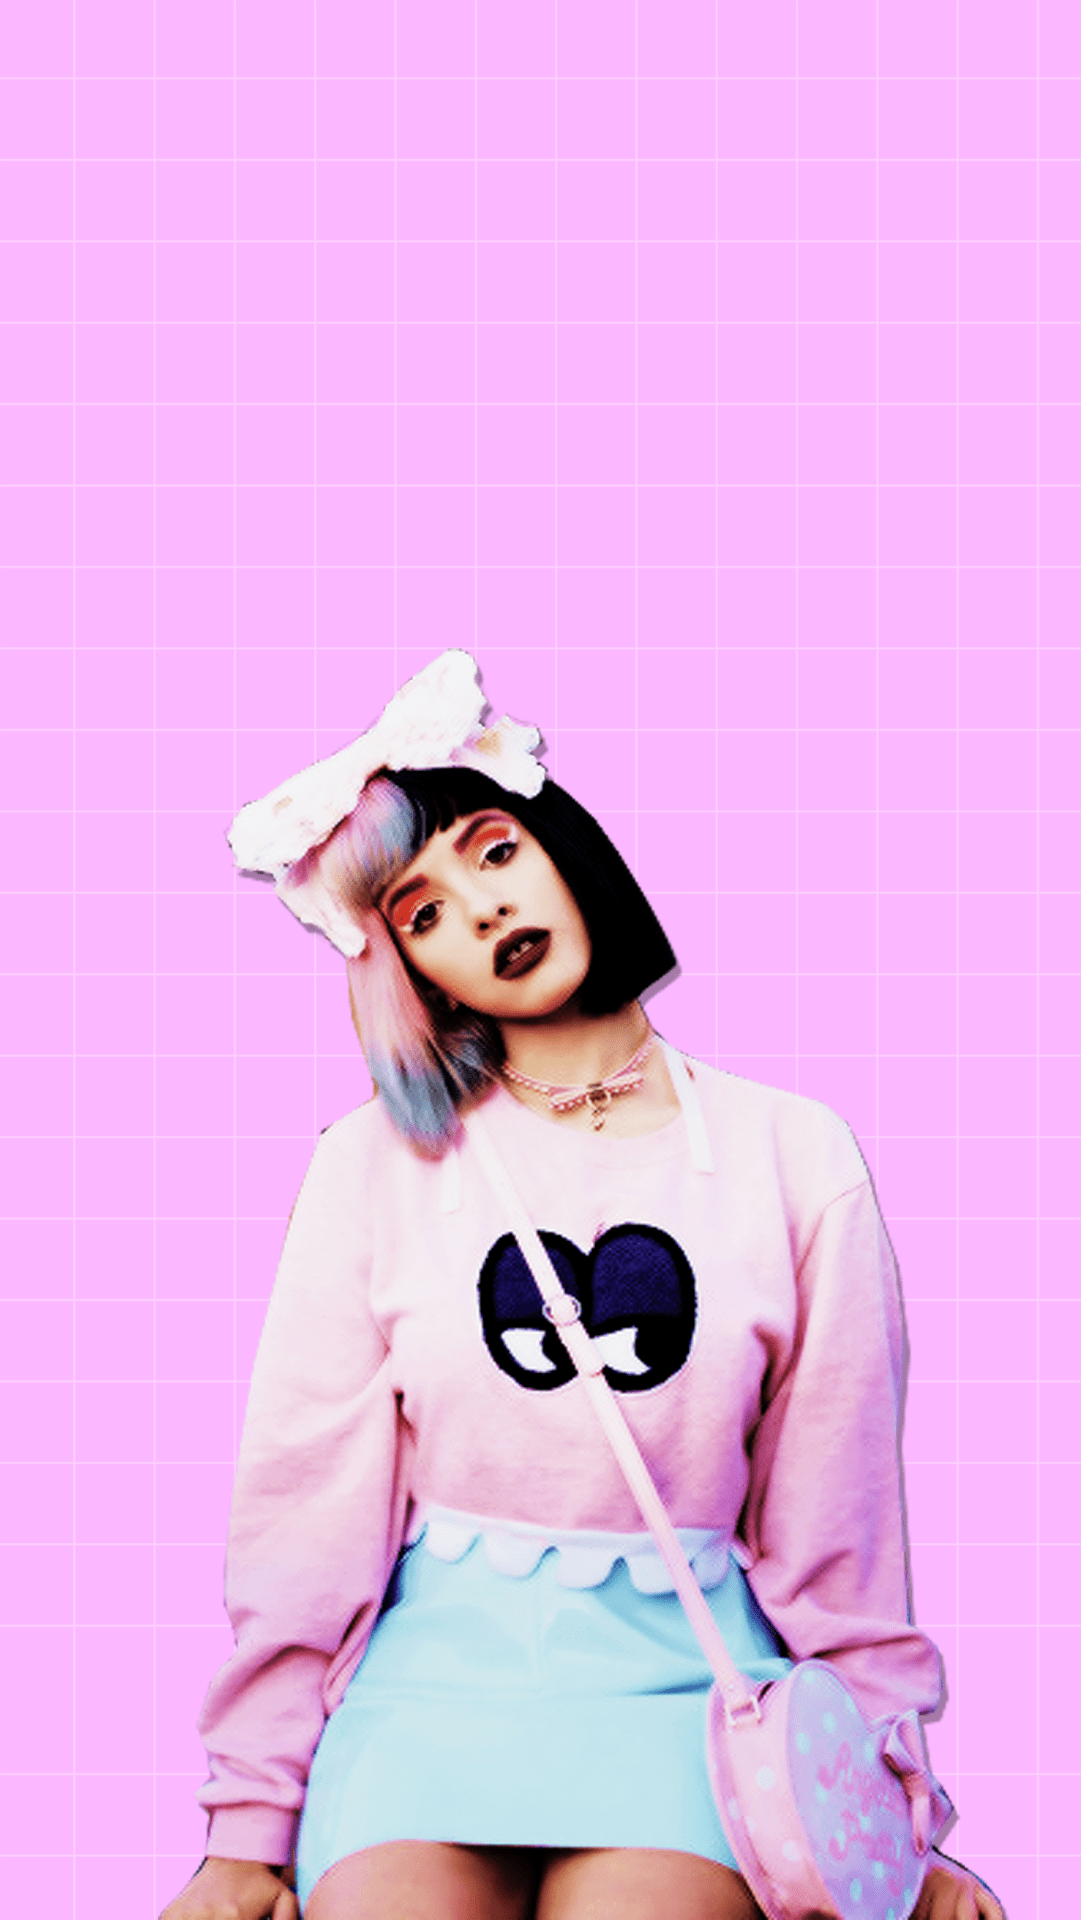 A woman in pink and blue clothing sitting on the ground - Melanie Martinez